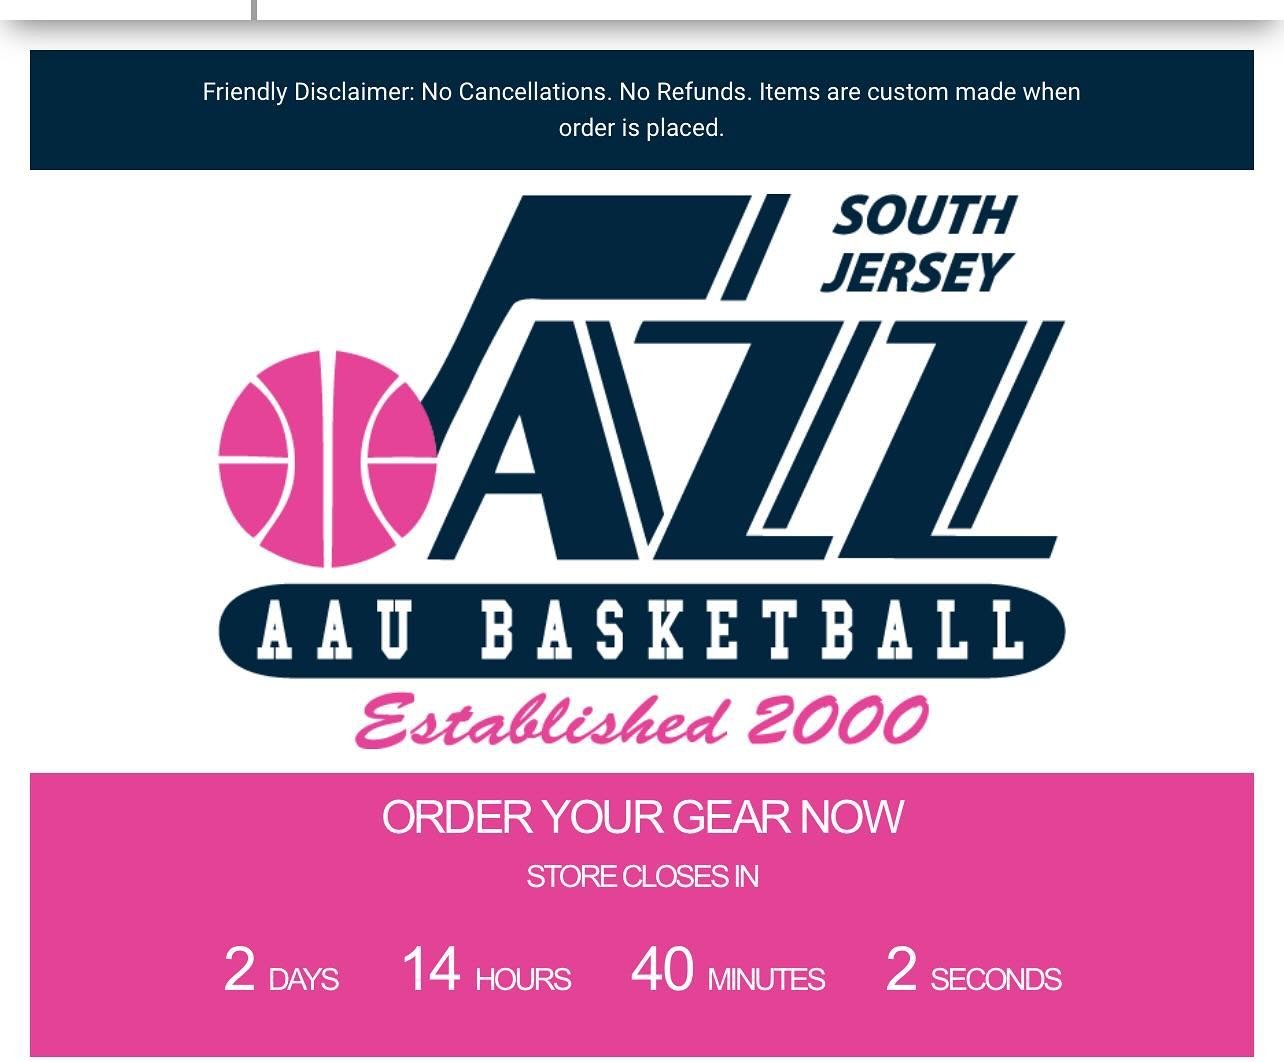 🔥REMINDER THE APRIL GIRLS SPIRIT STORE CLOSES SUNDAY. SO ORDER NOW BEFORE IT CLOSES!🔥

https://jupiter.areswear.com/store/?storeName=South_Jersey_Jazz_Girls_Basketball_2024_April_Reopen